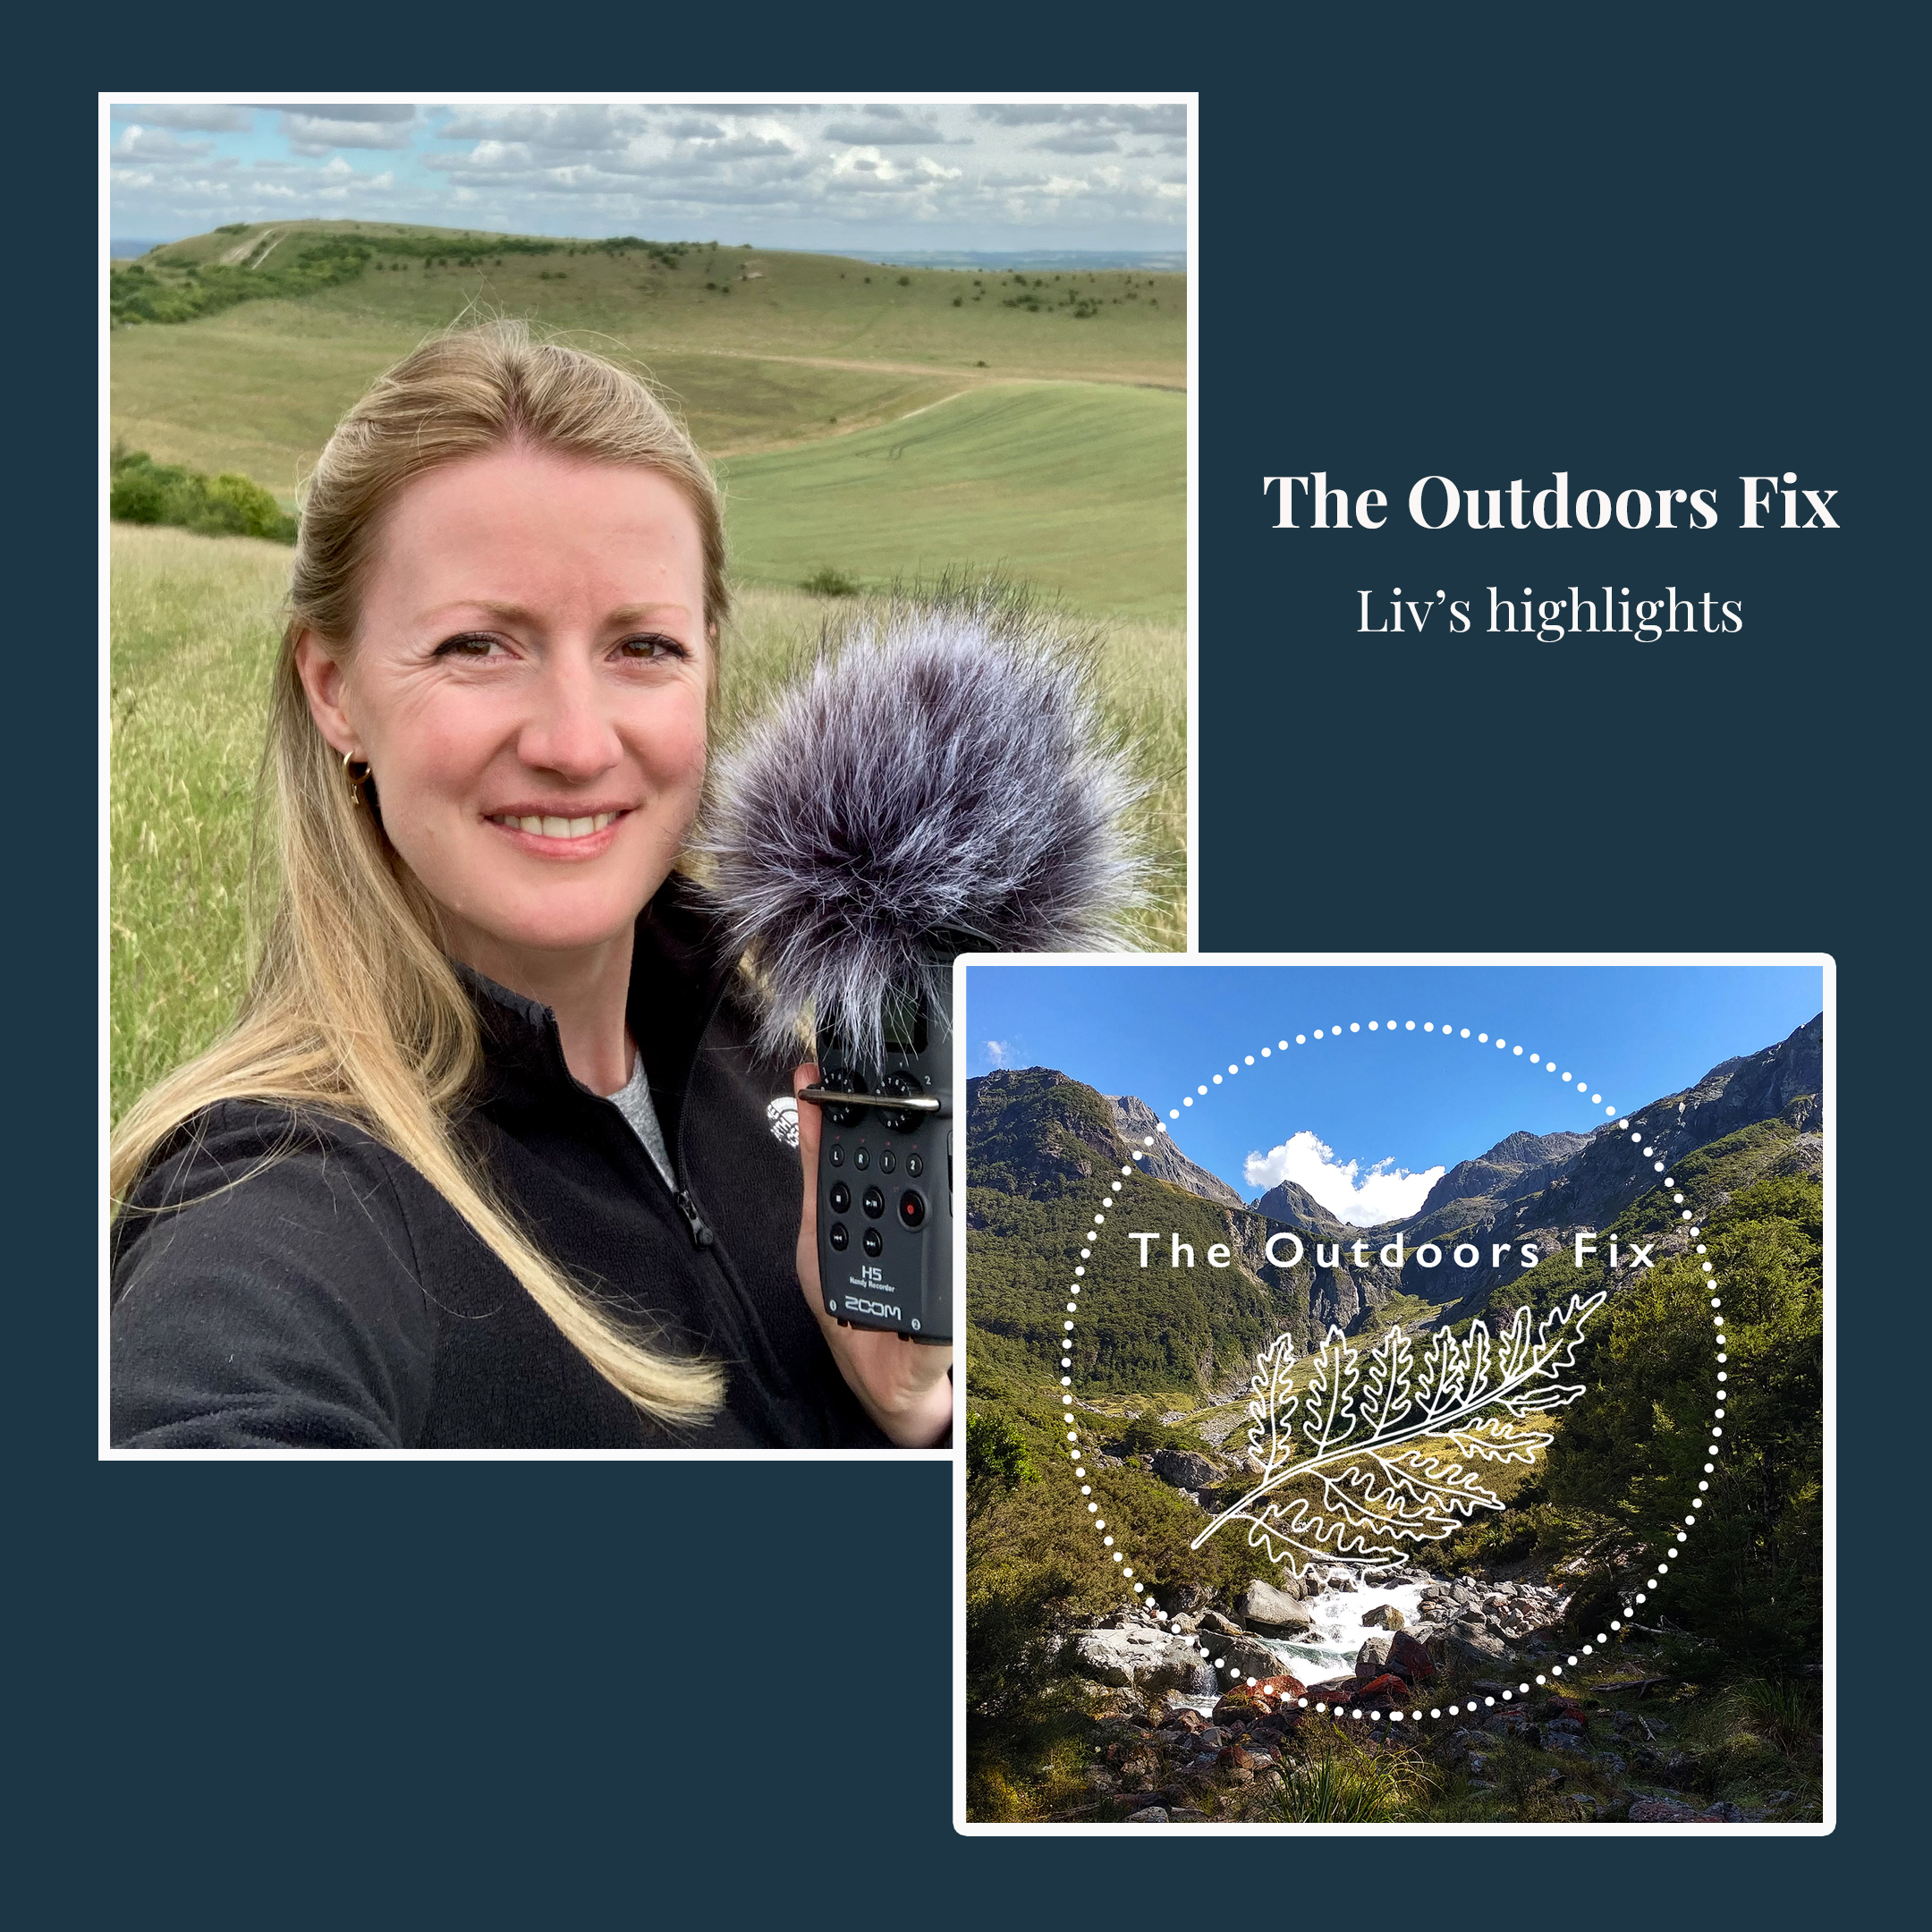 Liv’s highlights from 5 years of The Outdoors Fix podcast